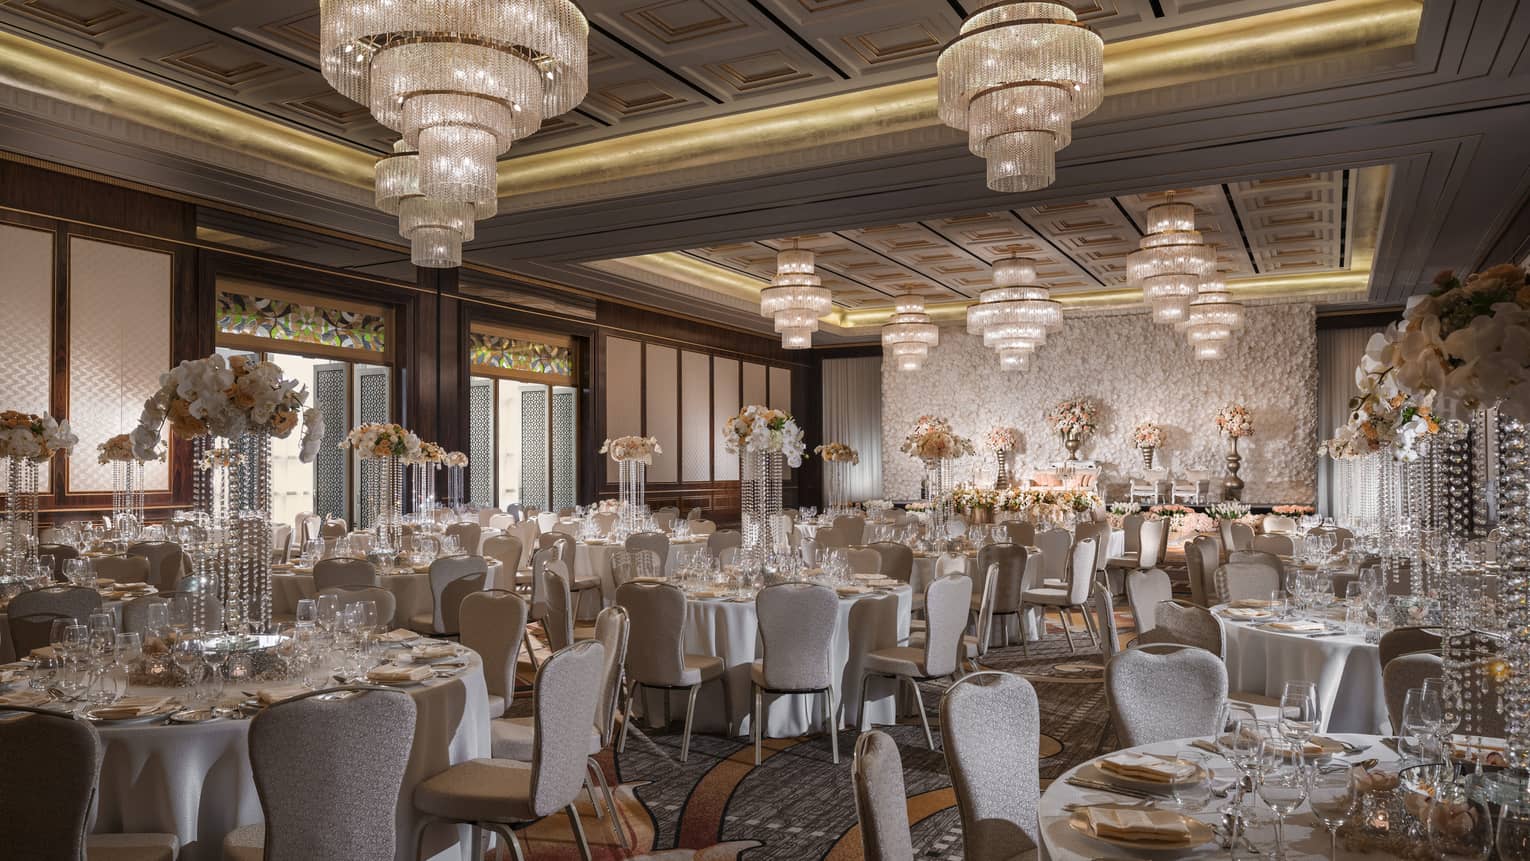 Large crystal chandeliers hang over round banquet tables in ballroom